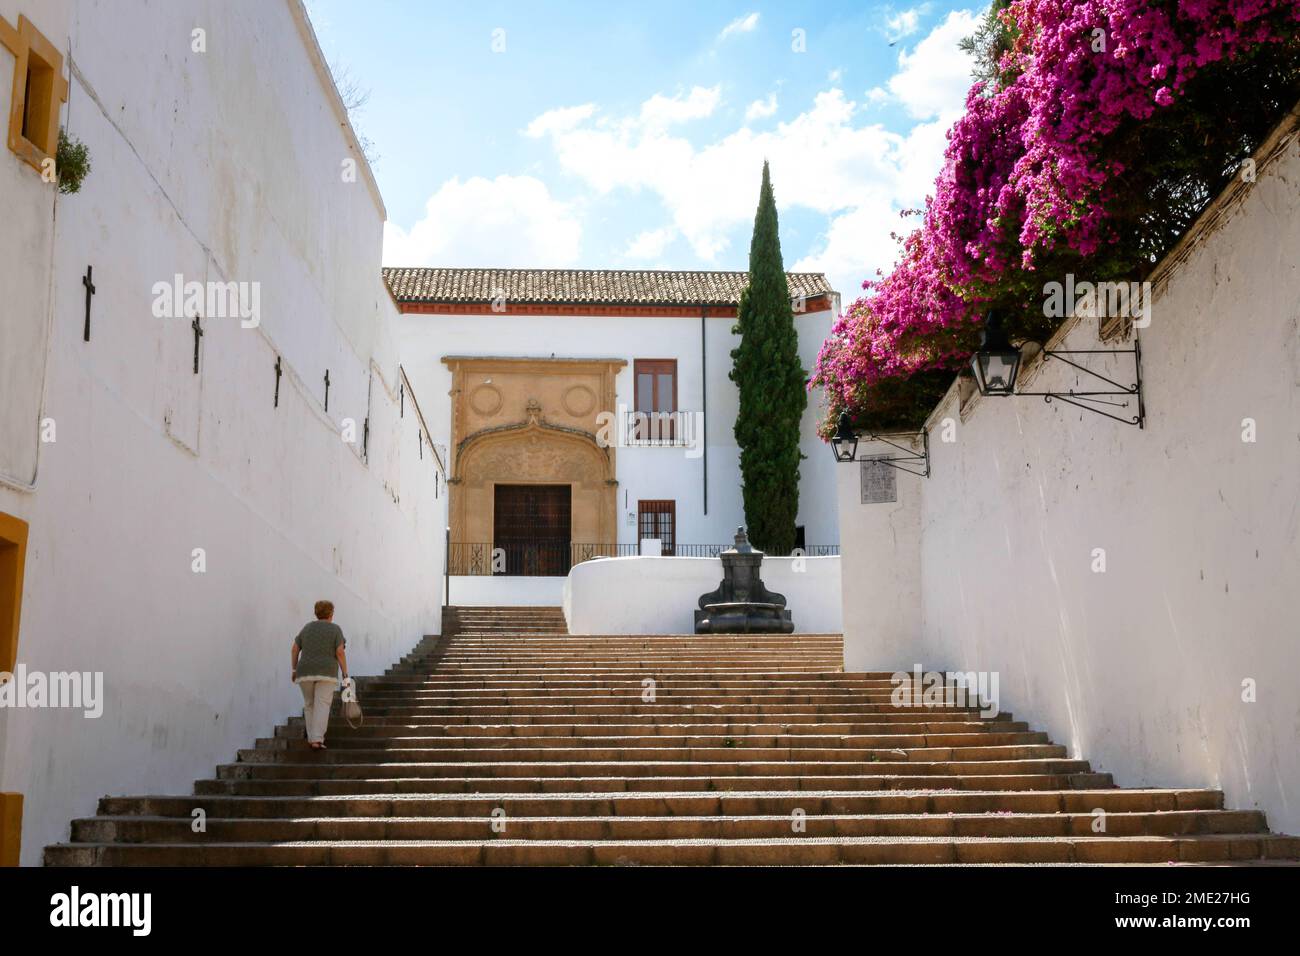 Views from the city of Cordoba, Spain Stock Photo